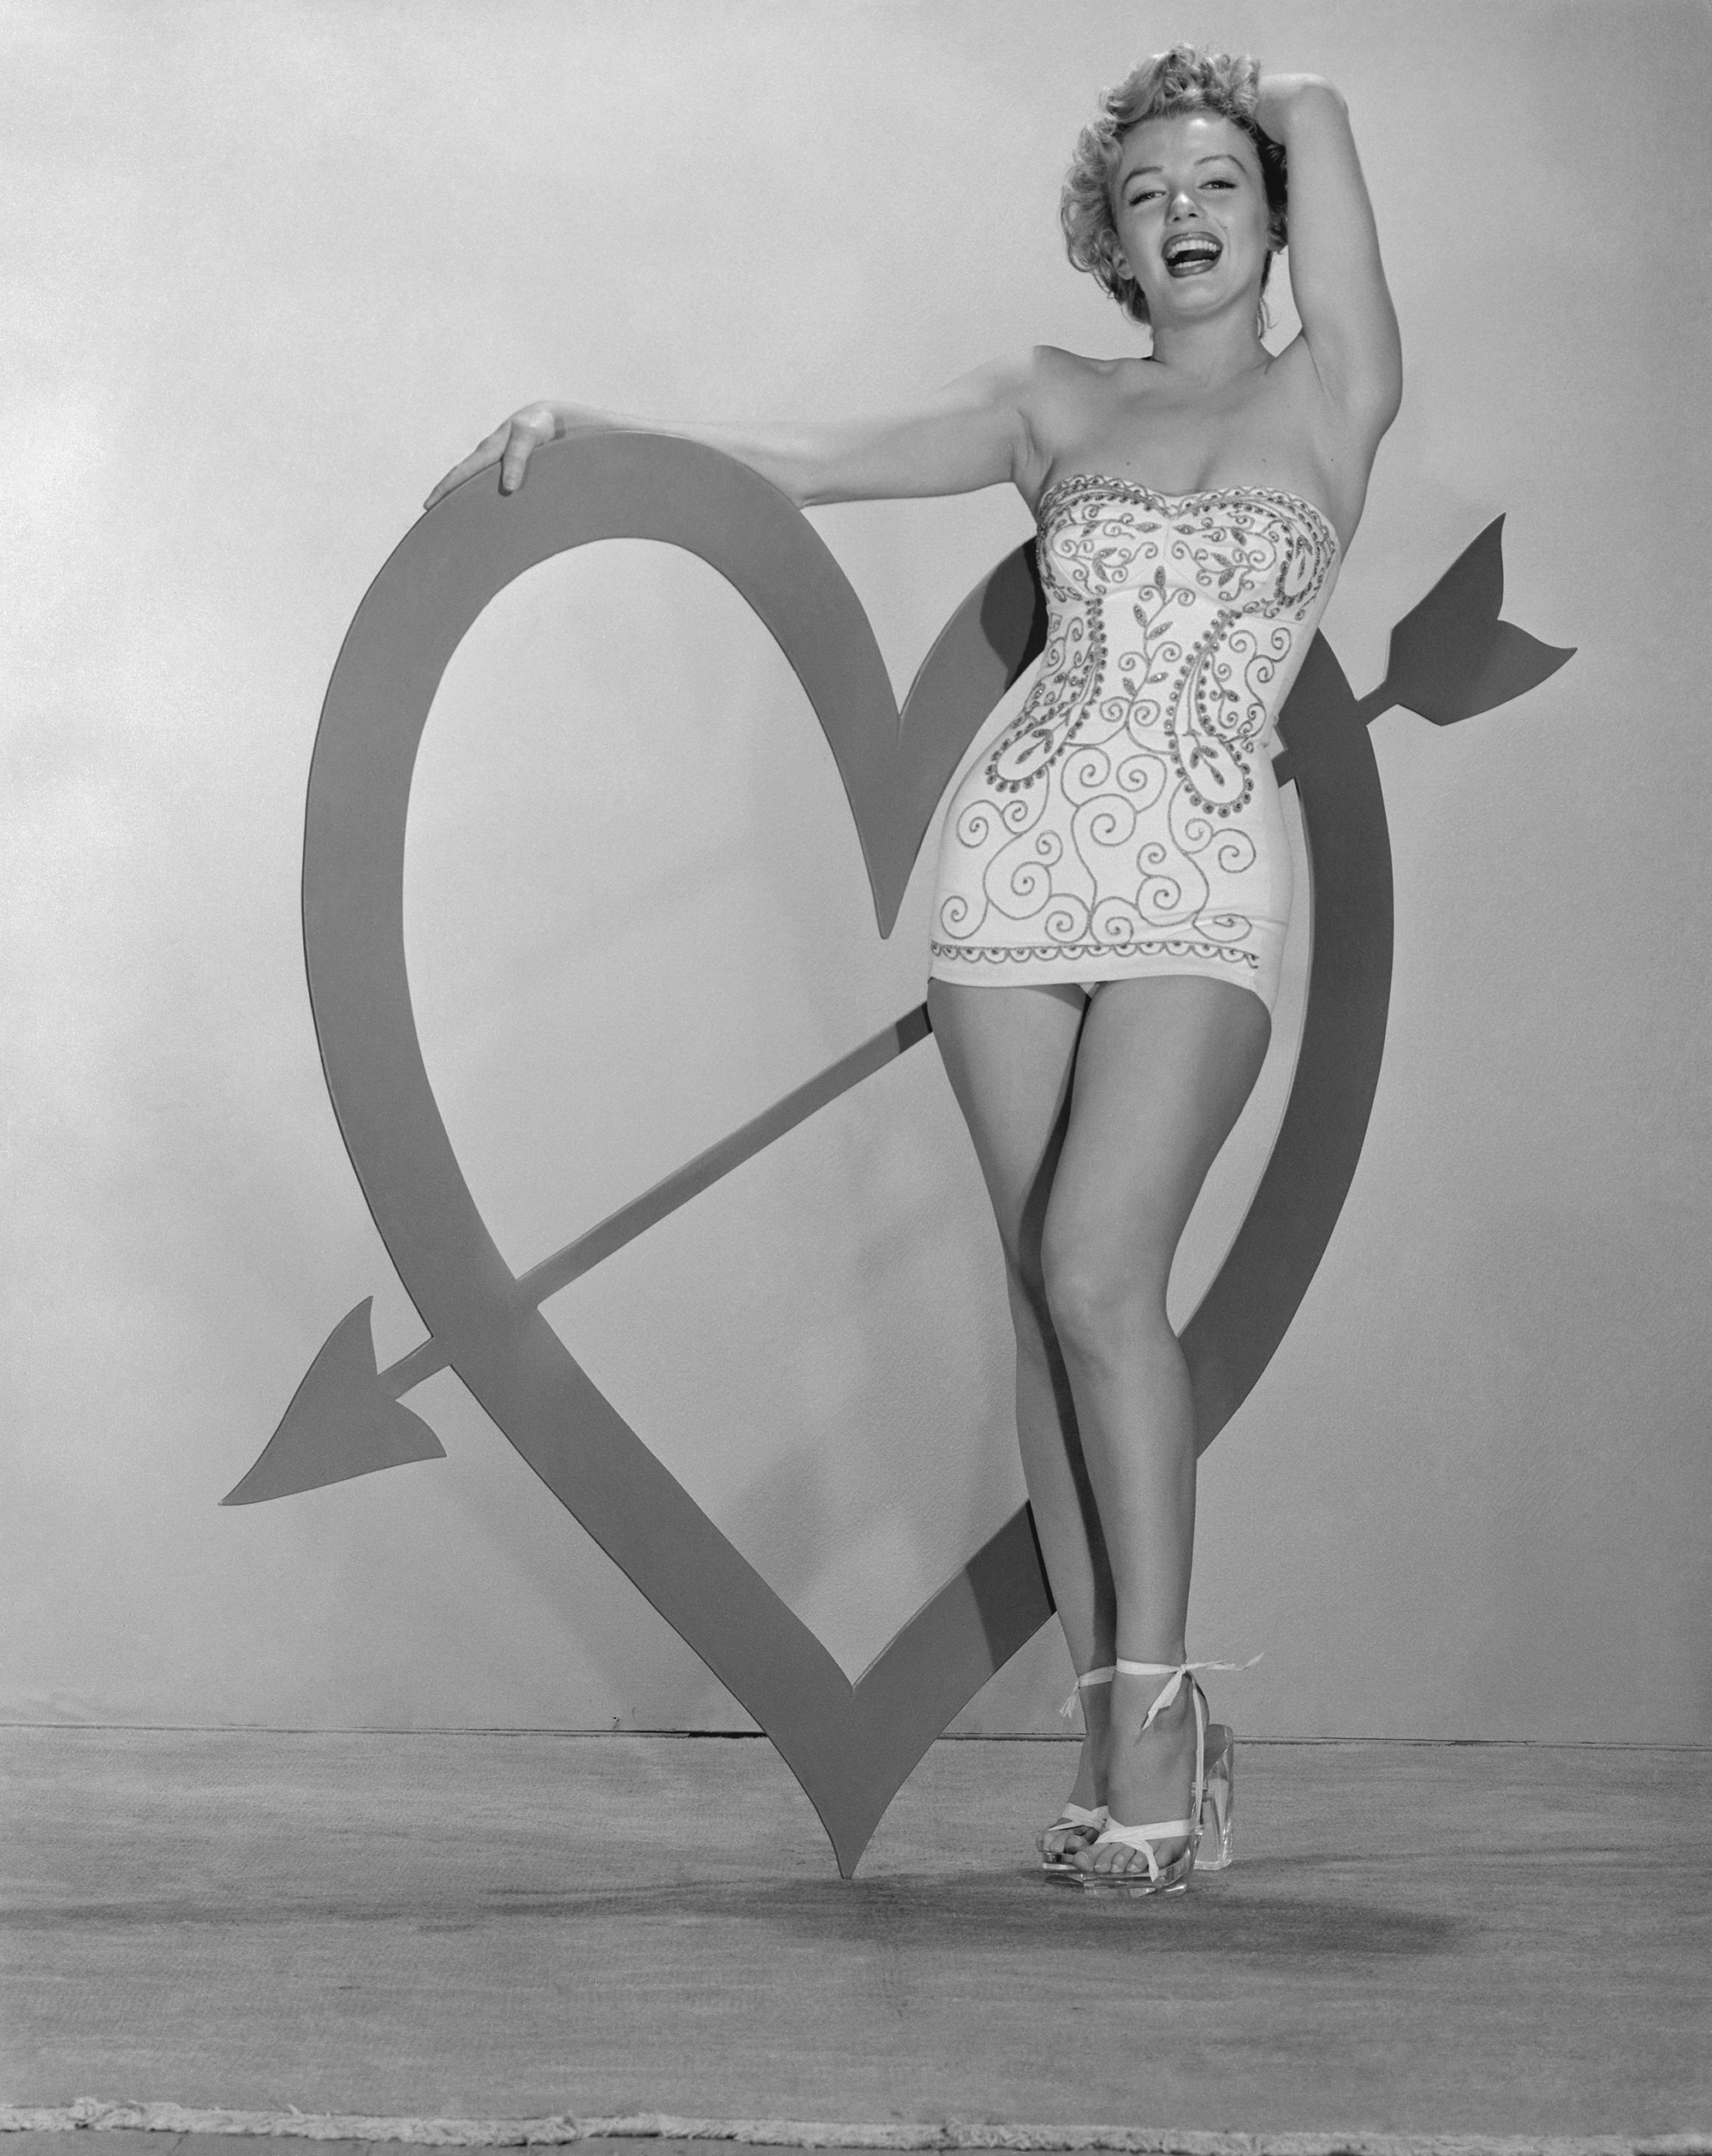 Marilyn Monroe stands beside a large heart shape with an arrow through it for Valentine's Day in a 1955 studio portrait